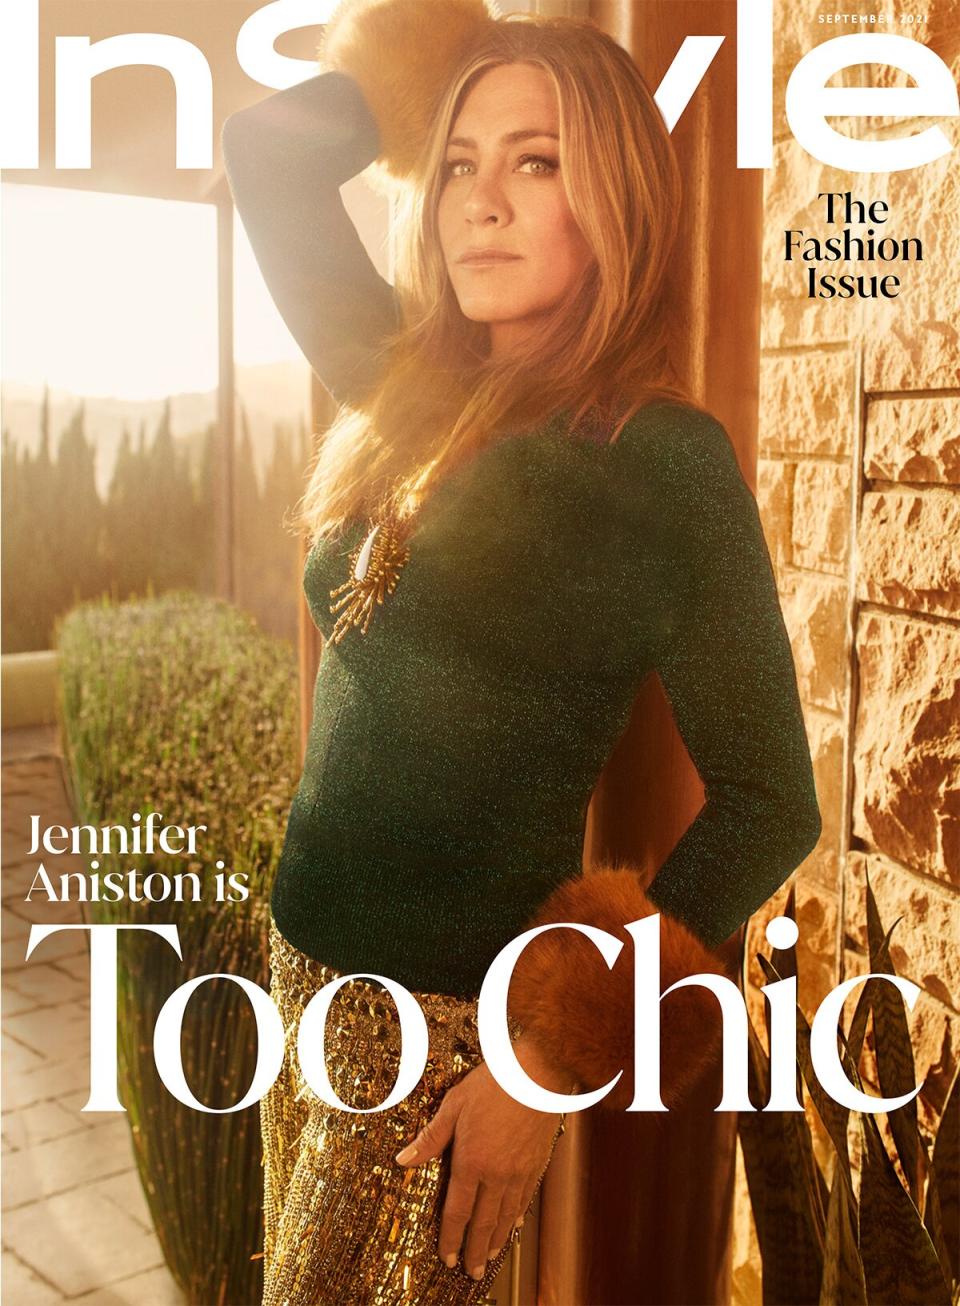 Jennifer Aniston is gracing the cover of InStyle’s SEPTEMBER issue